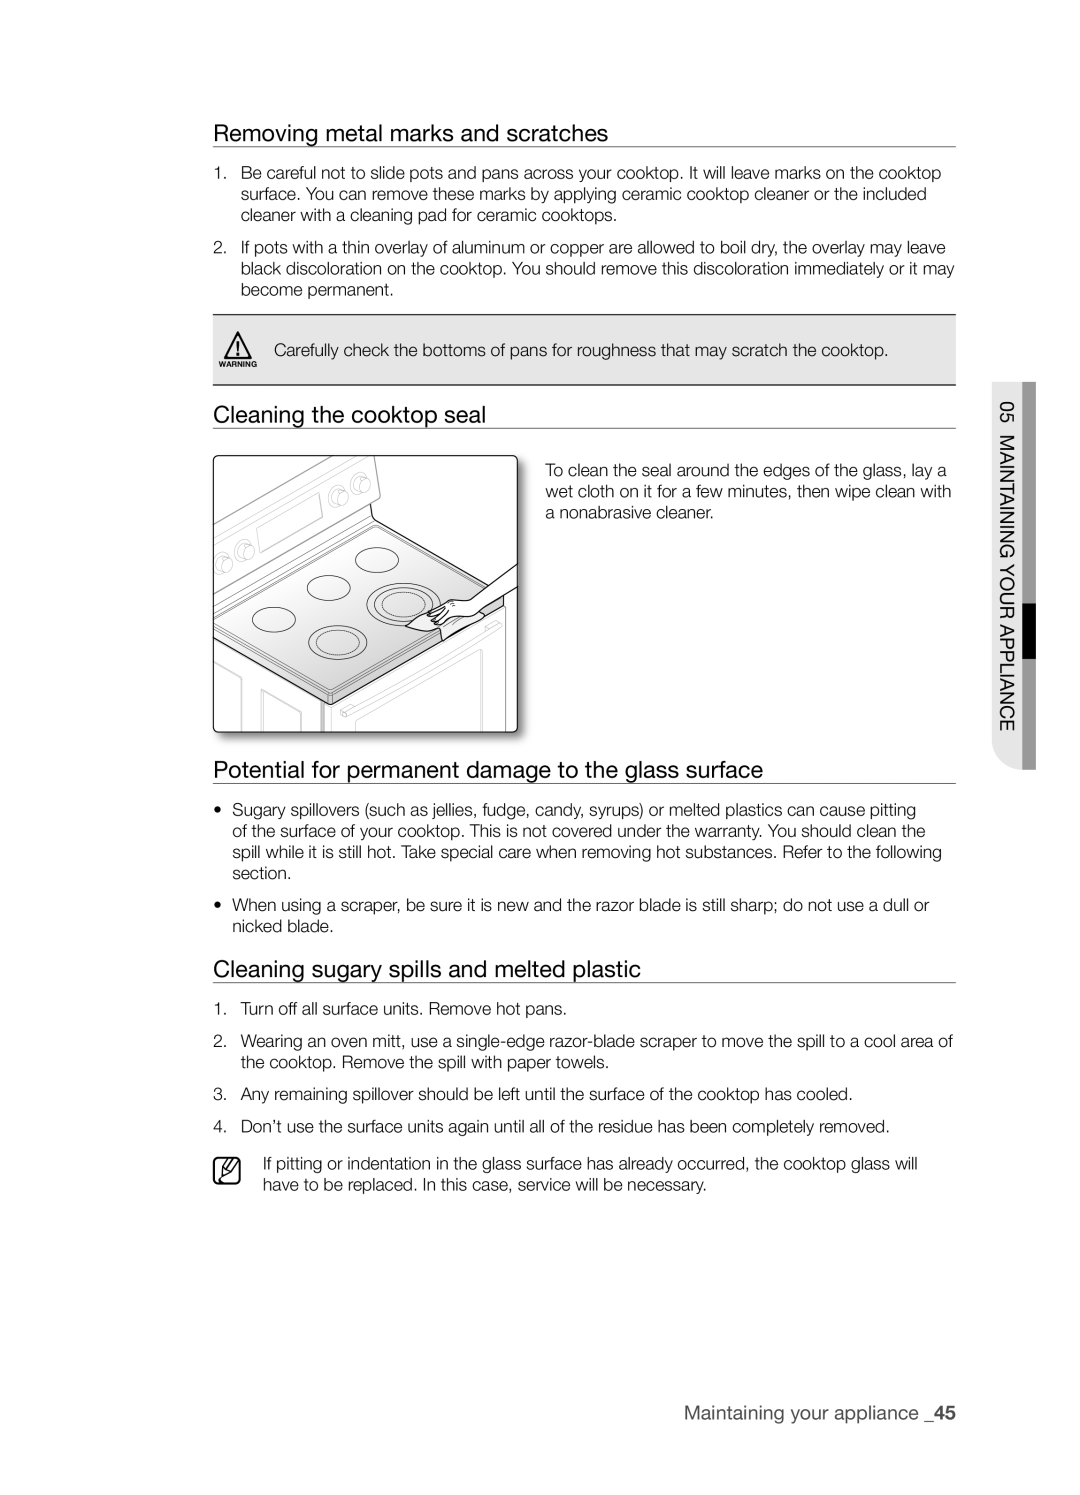 Samsung FTQ386LWUX user manual Removing metal marks and scratches, Cleaning the cooktop seal, Maintaining Your Appliance 